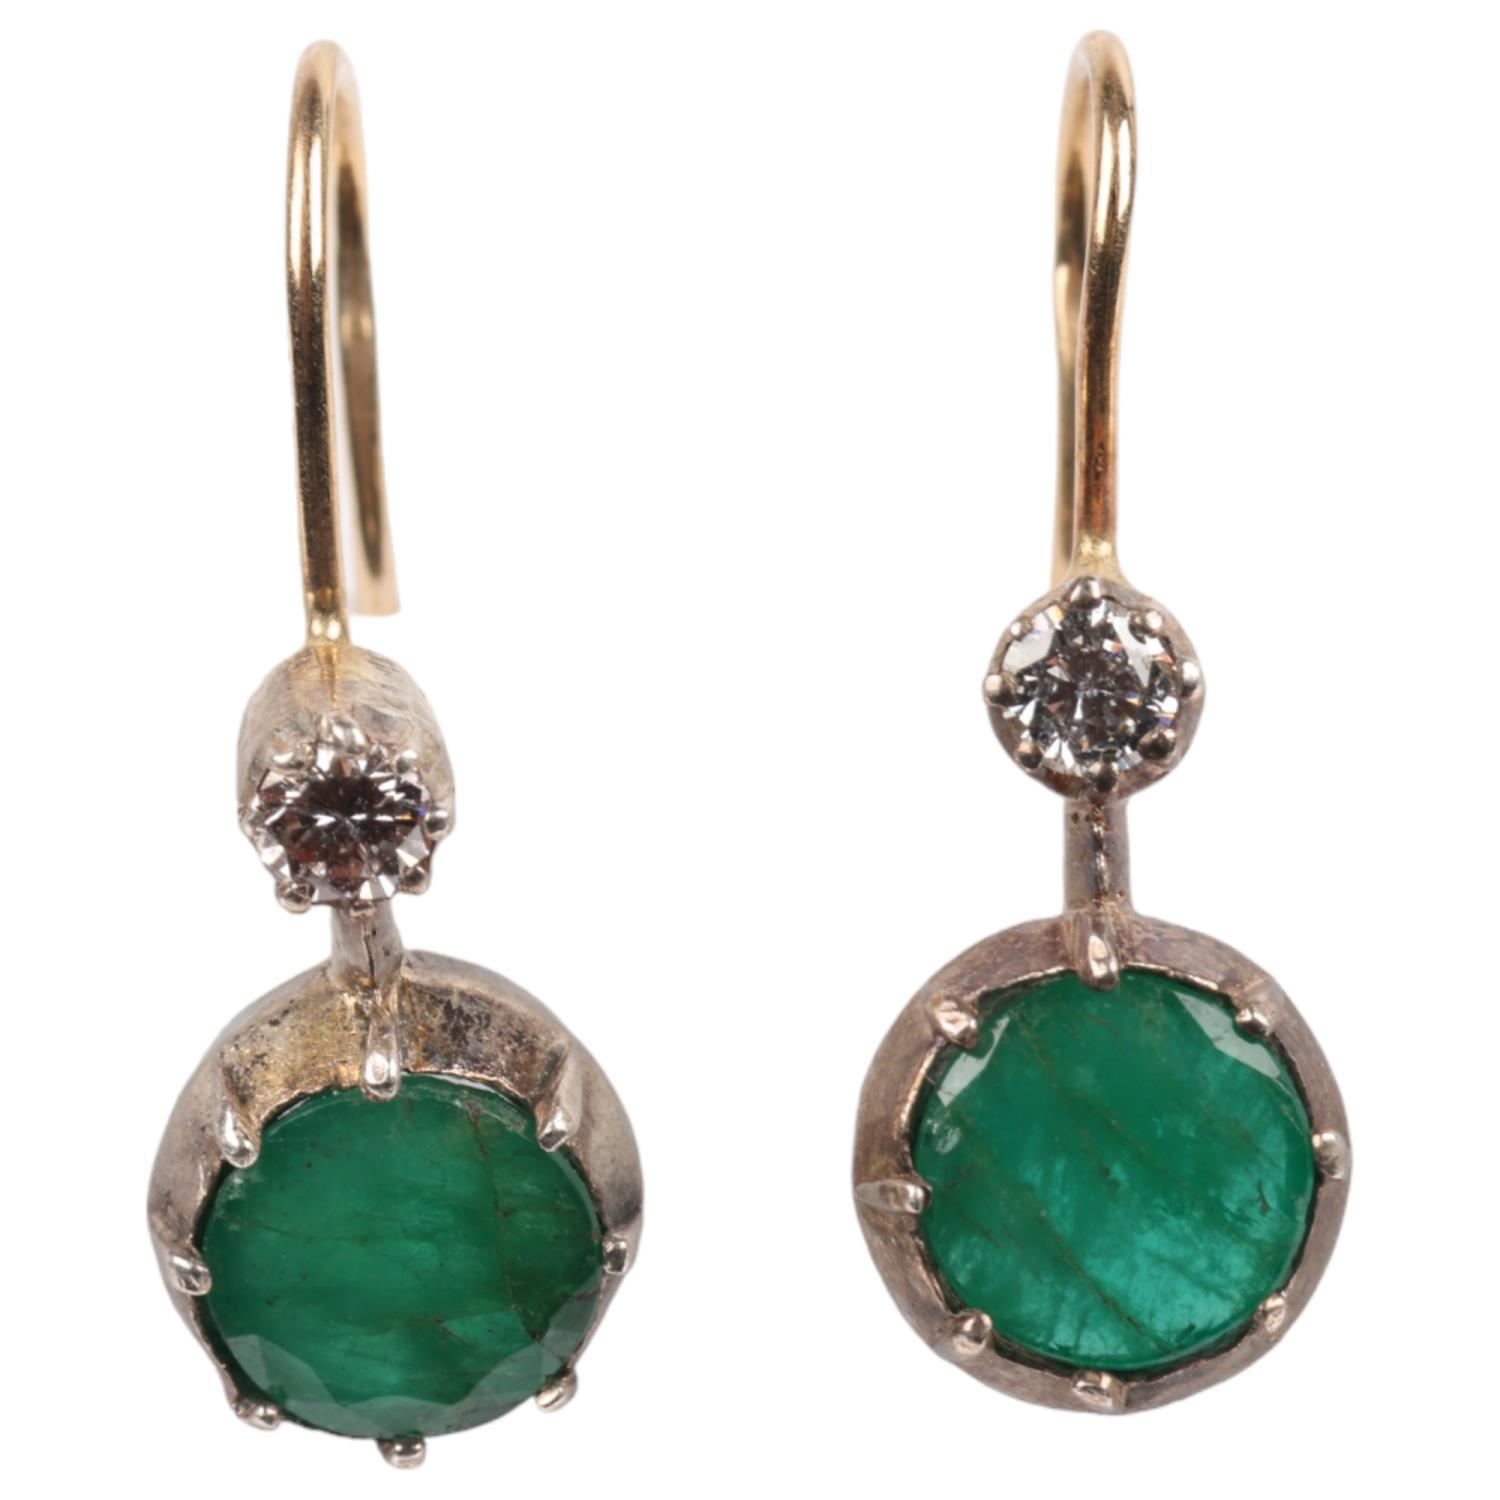 A pair of emerald and diamond drop earrings, in the Georgian style, cut-down collet set with round-